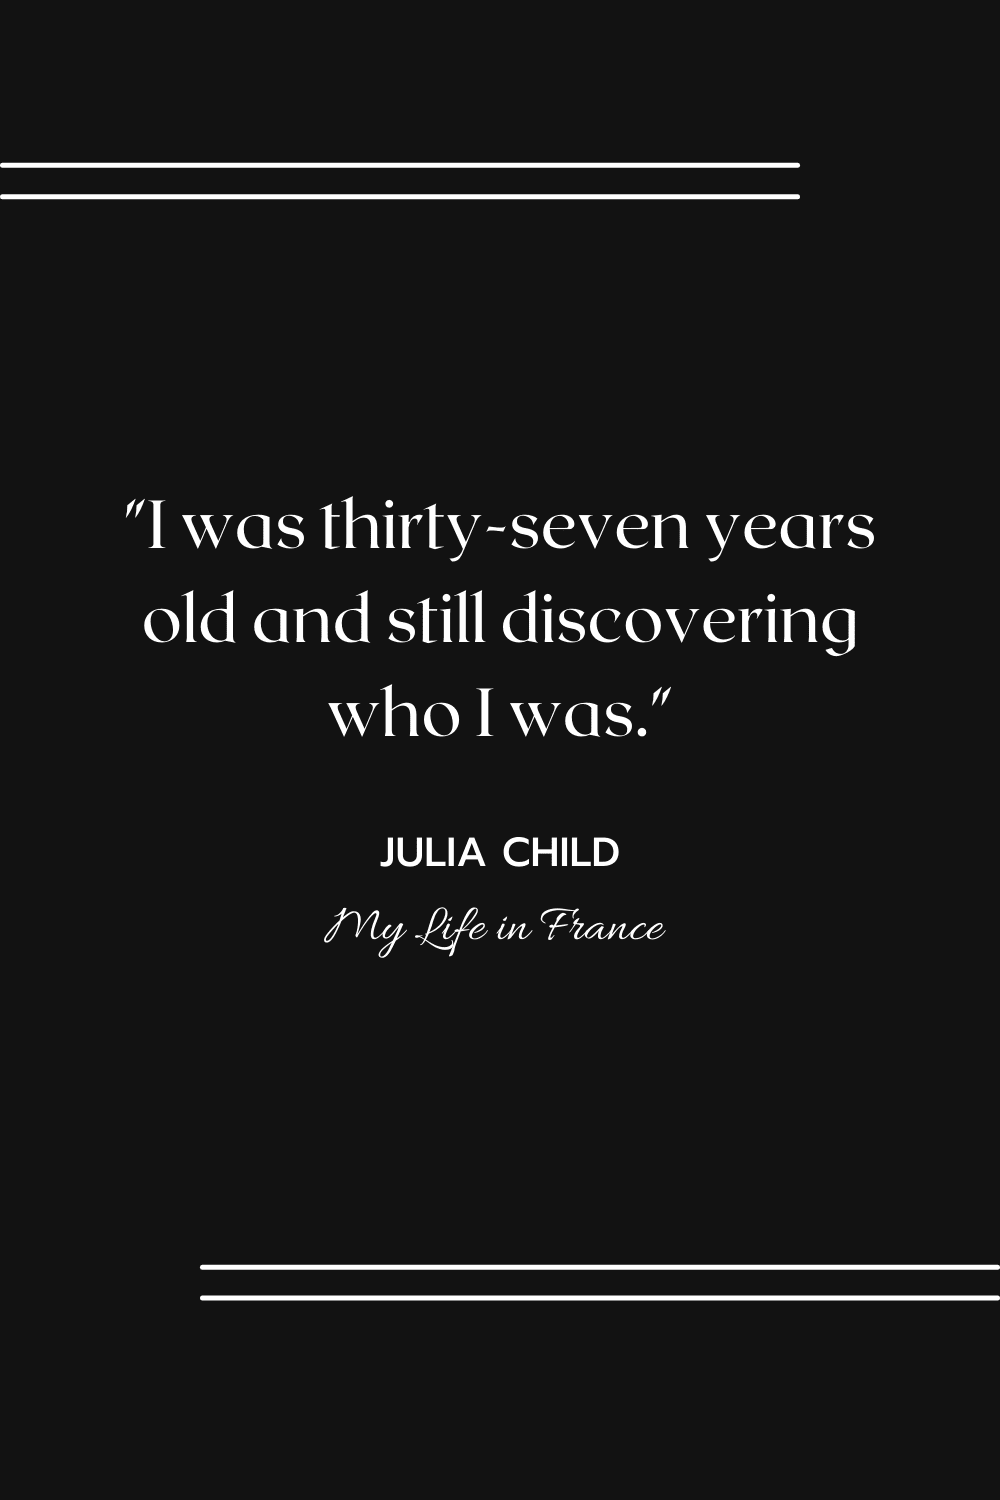 Julia child quotes my life in france